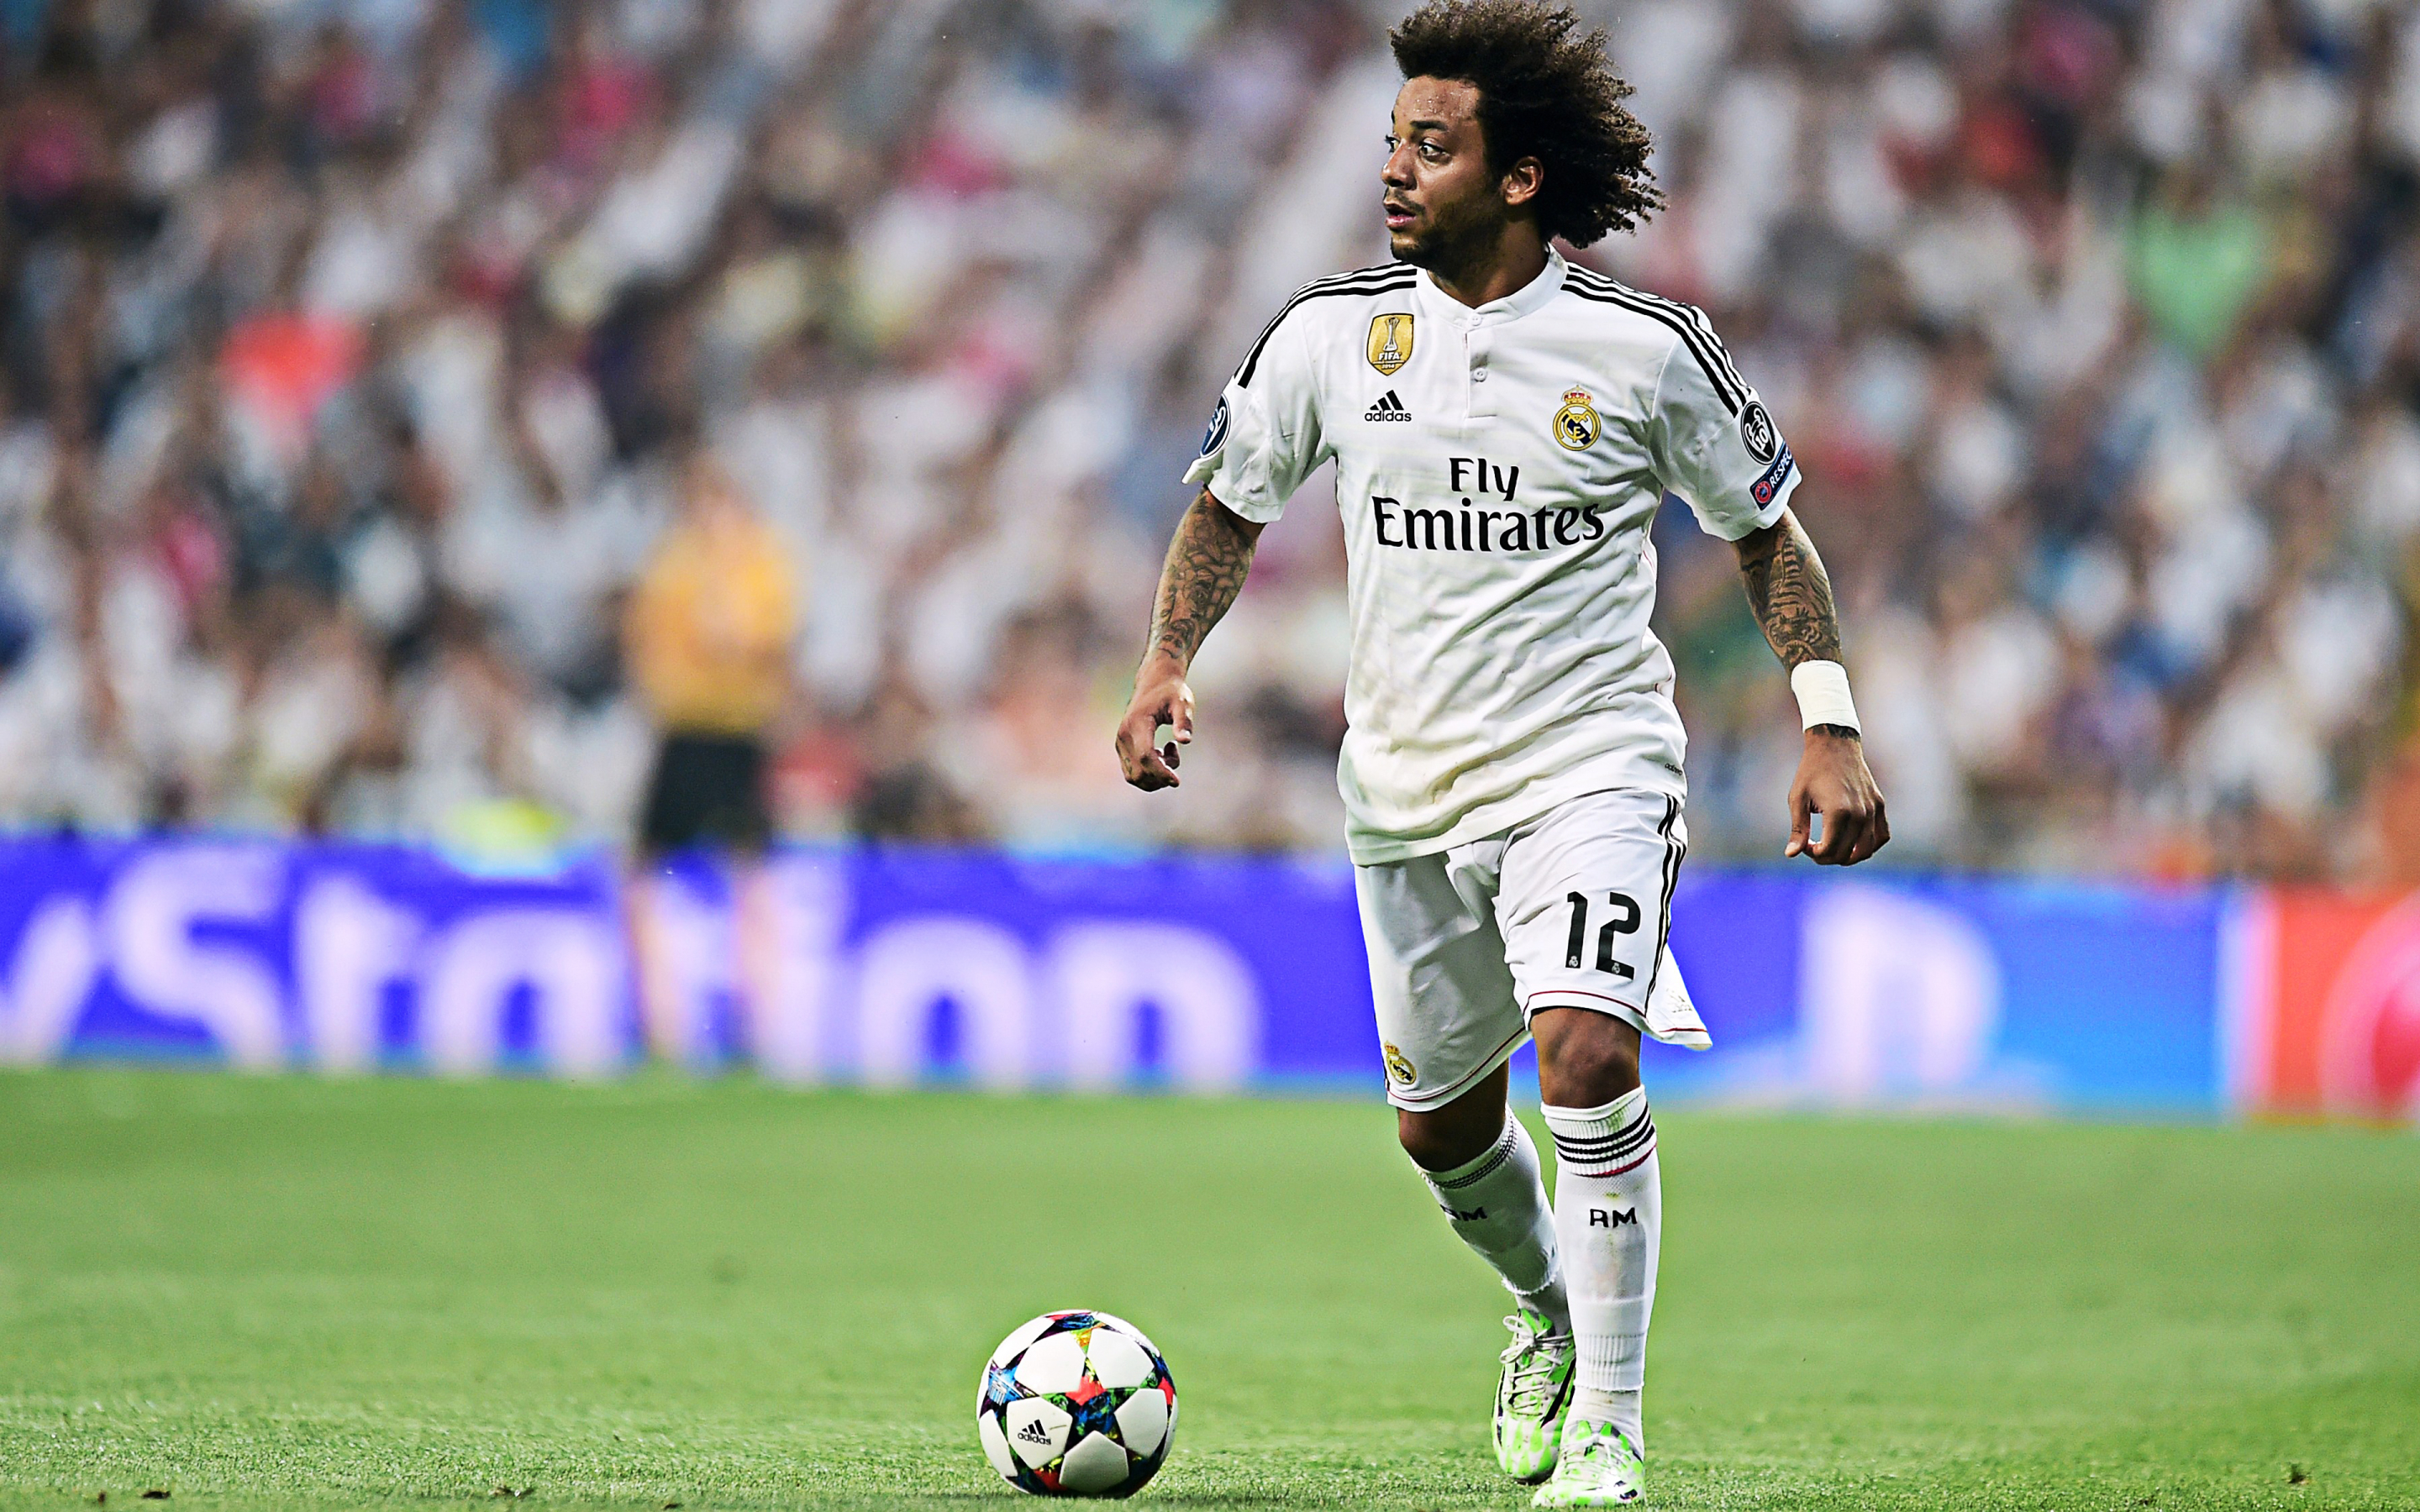 marcelo vieira, sports, real madrid c f, soccer